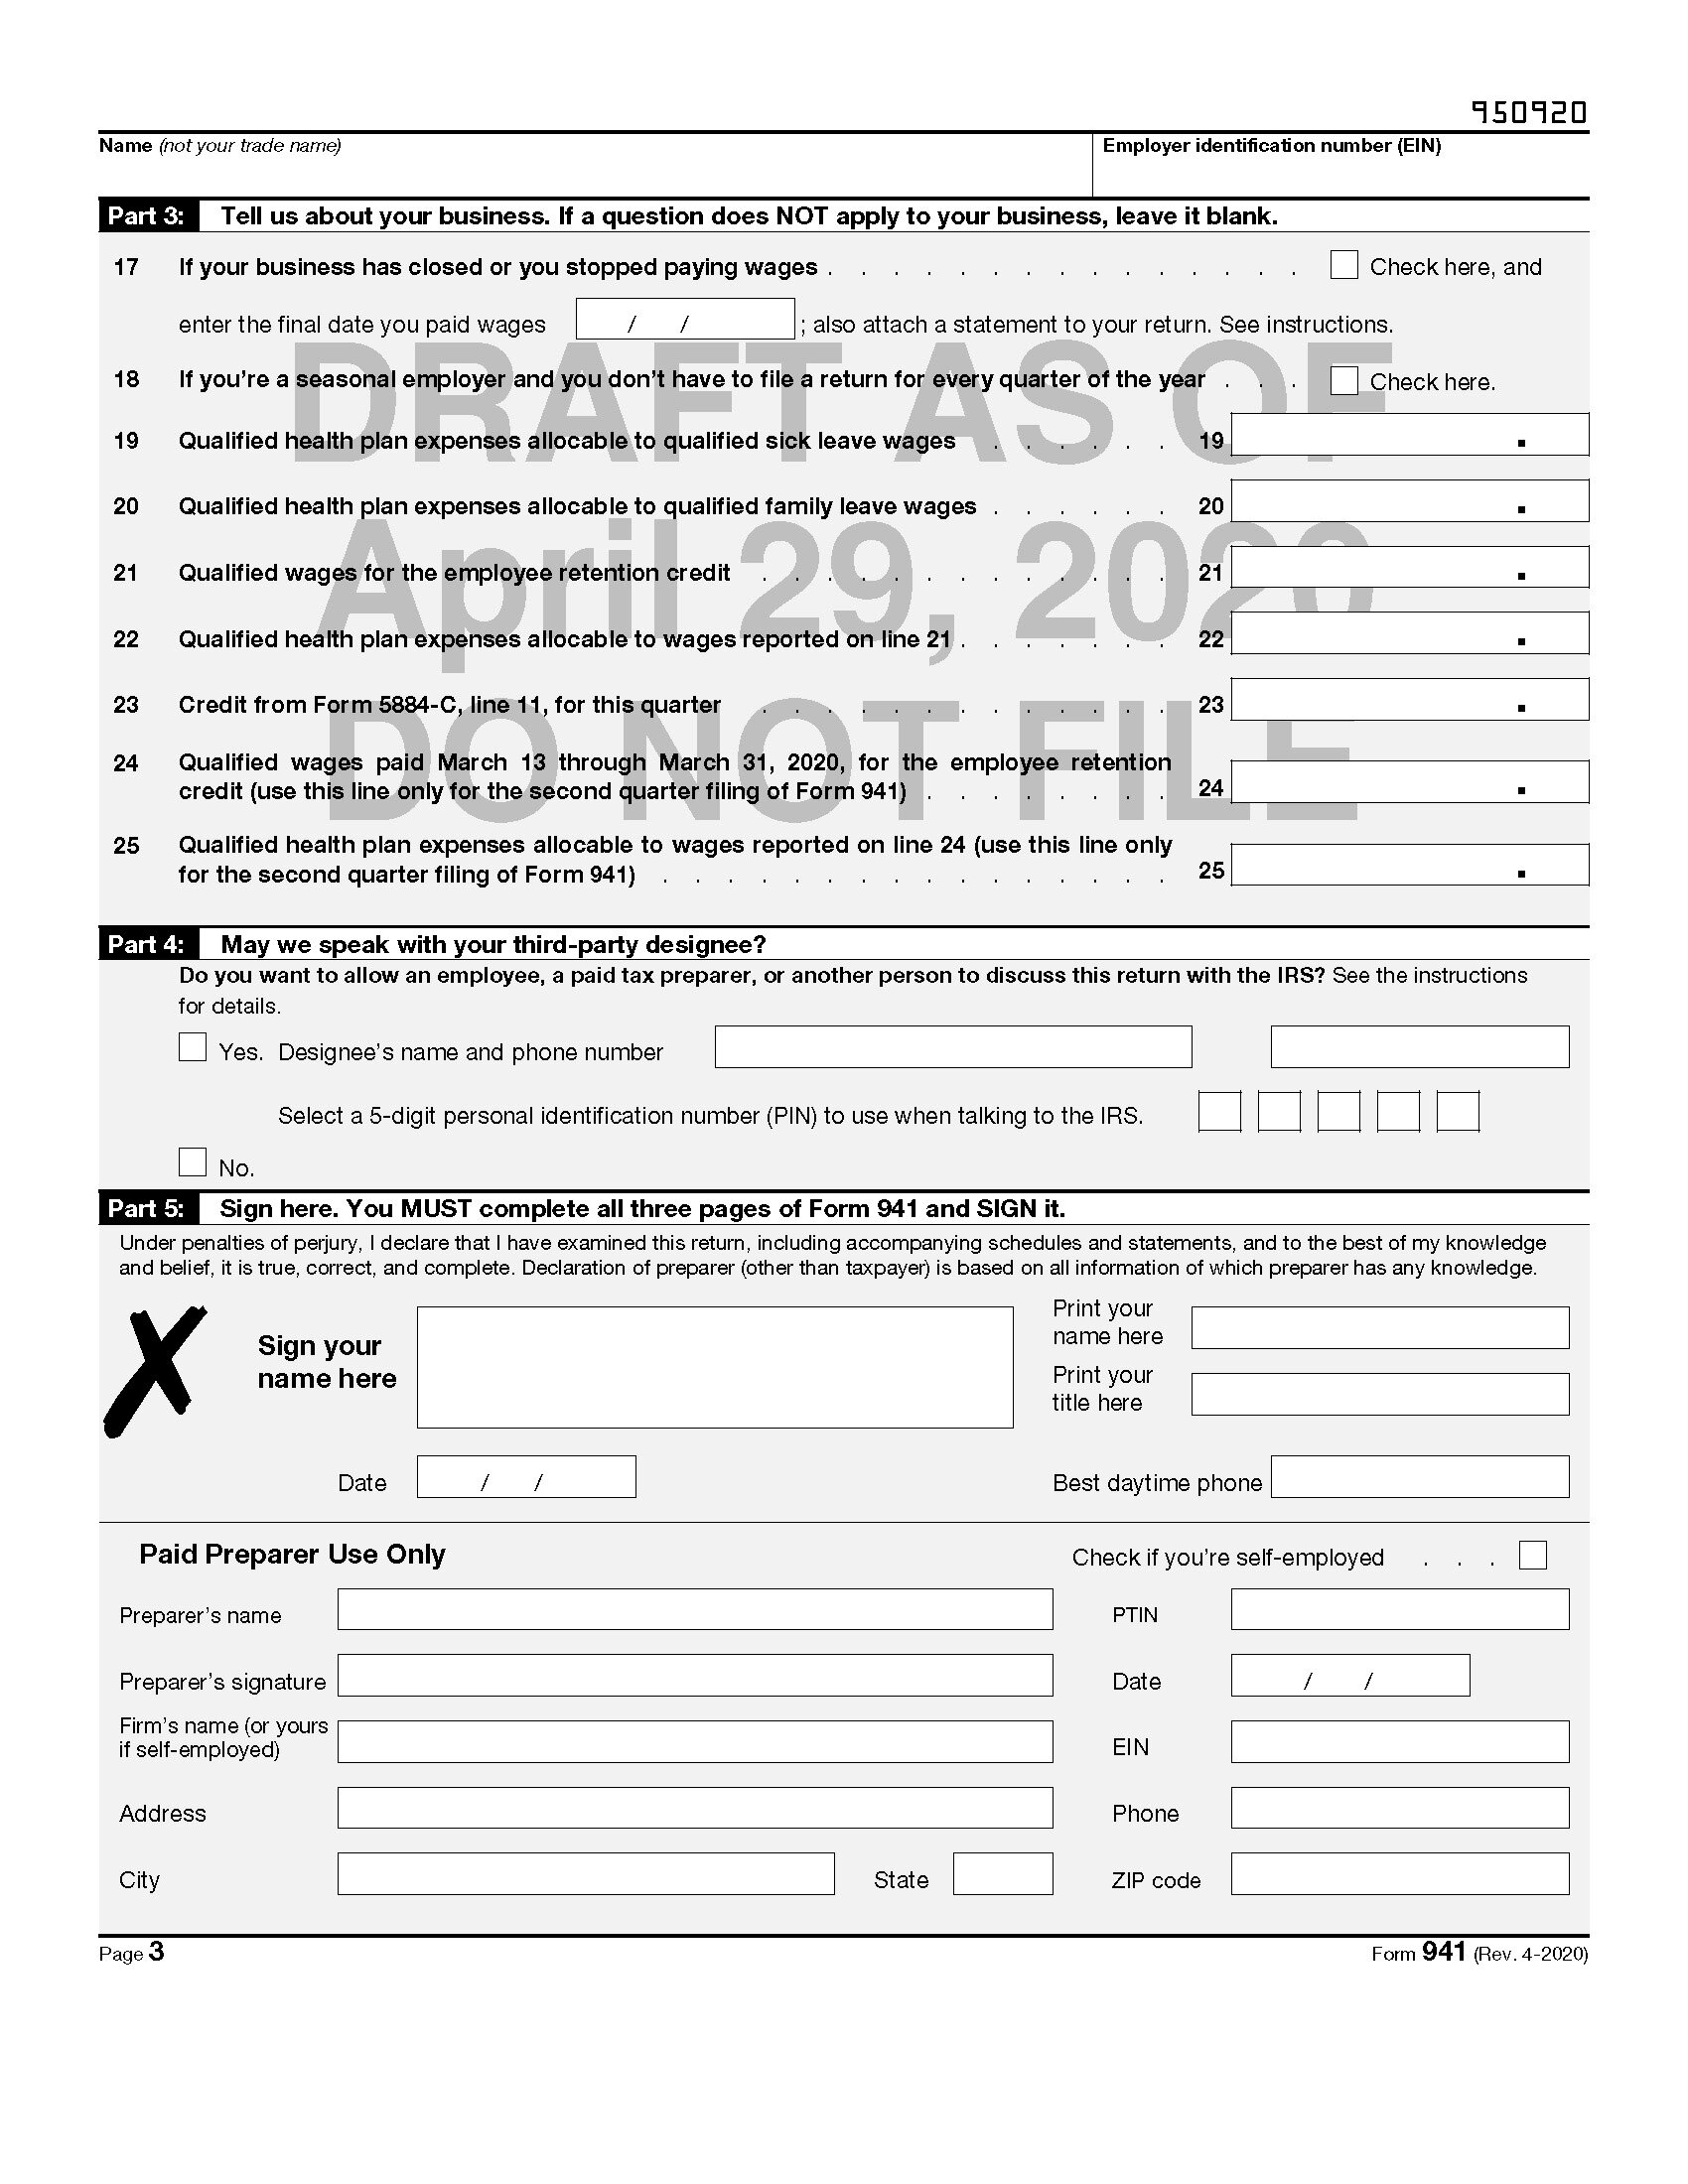 Draft of Revised Form 941 Released by IRS Includes FFCRA and CARES